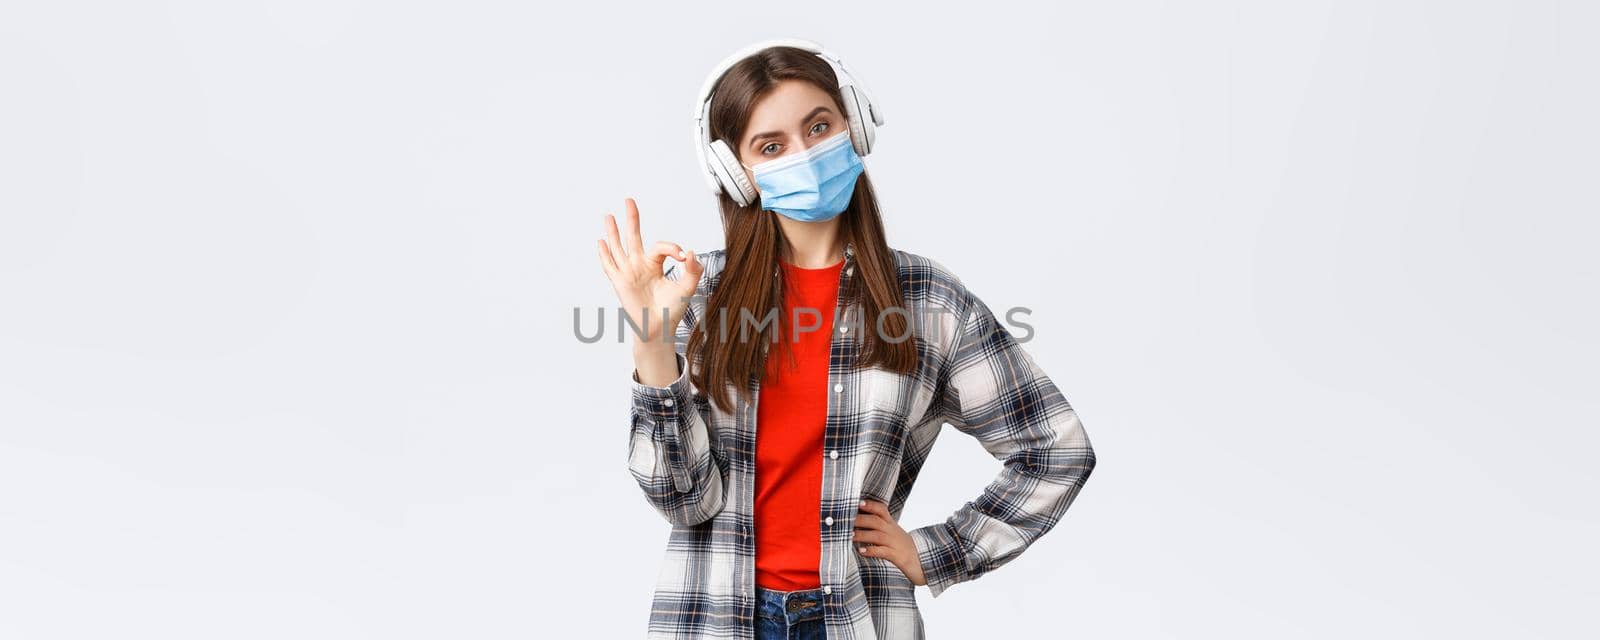 Social distancing, leisure and lifestyle on covid-19 outbreak, coronavirus concept. Pleased good-looking woman in medical mask and headphones, listening music, show okay sign, approve or like.